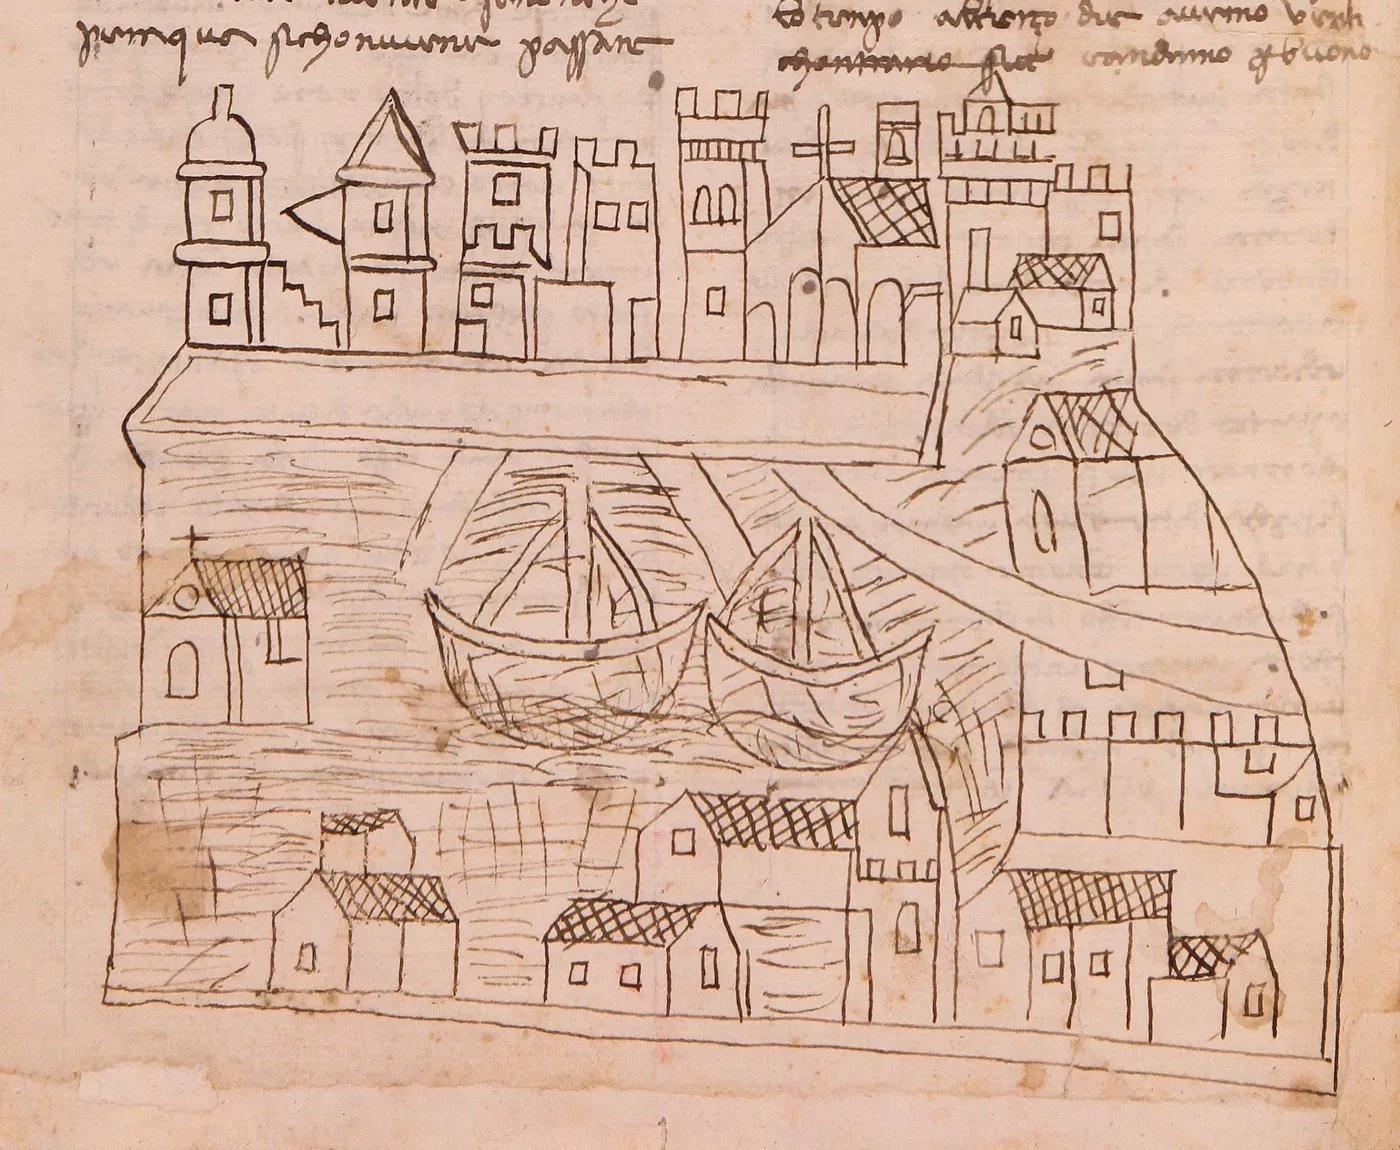 A Drawing of Venice from c. 1350